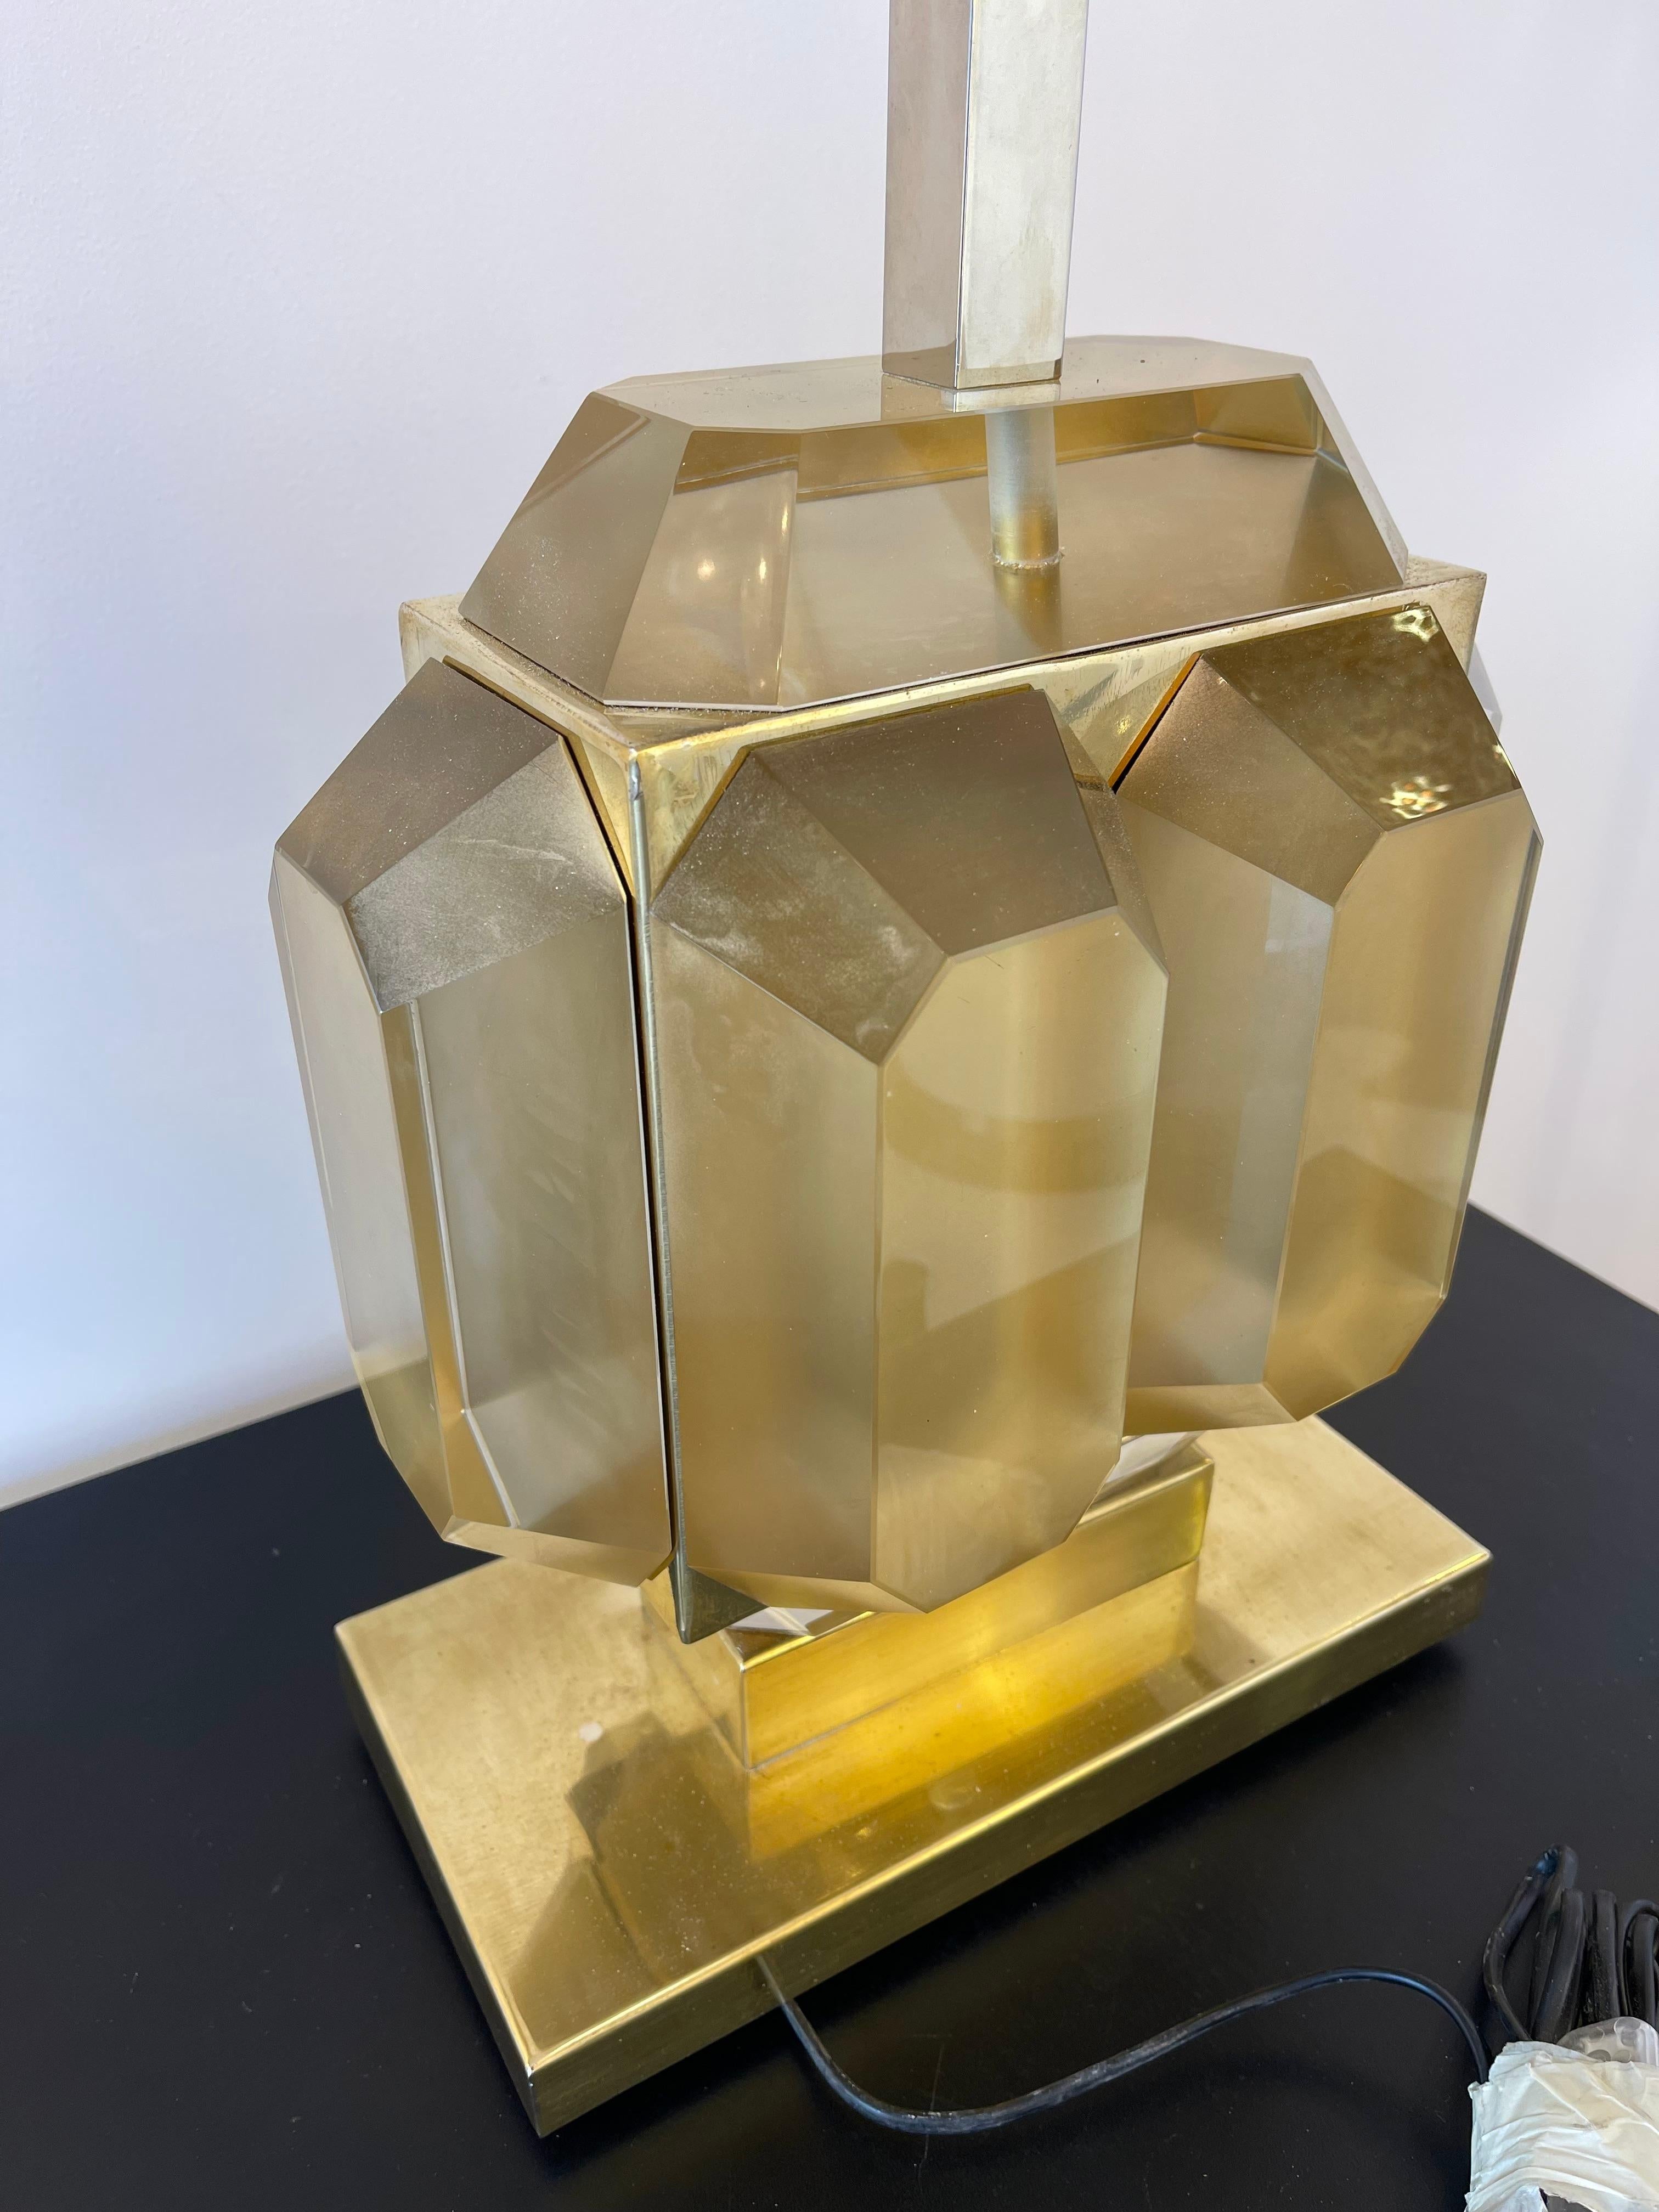 Pair of Gold Murano glass bar and brass table or bedside lamps. Contemporary work from a small artisanal italian design workshop. In the mood of Mid-Century Modern, Hollywood Regency, Venini, Mazzega, La Murrina, Veronese, Barovier, Fratelli Toso,